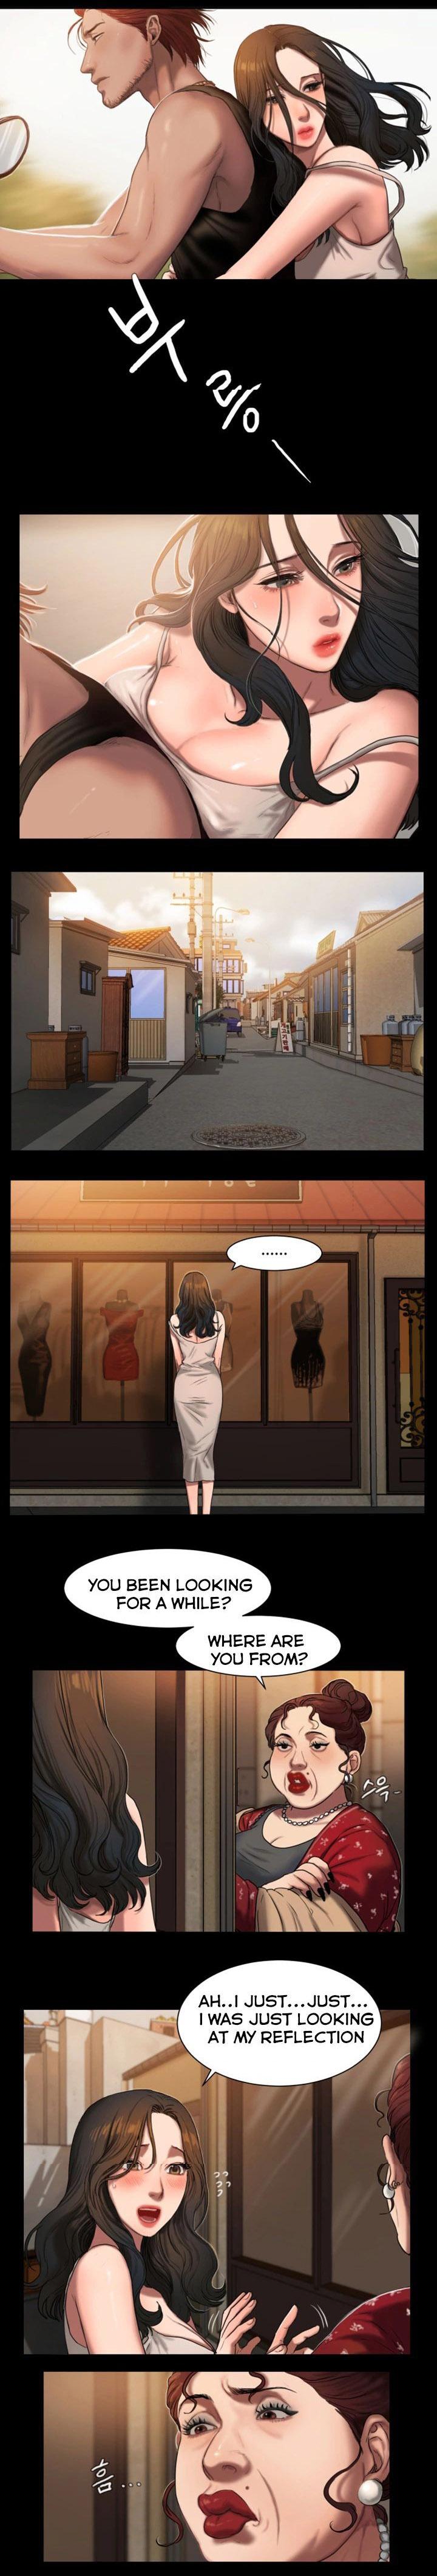 Model Run Away Ch.12/? Chacal - Page 8